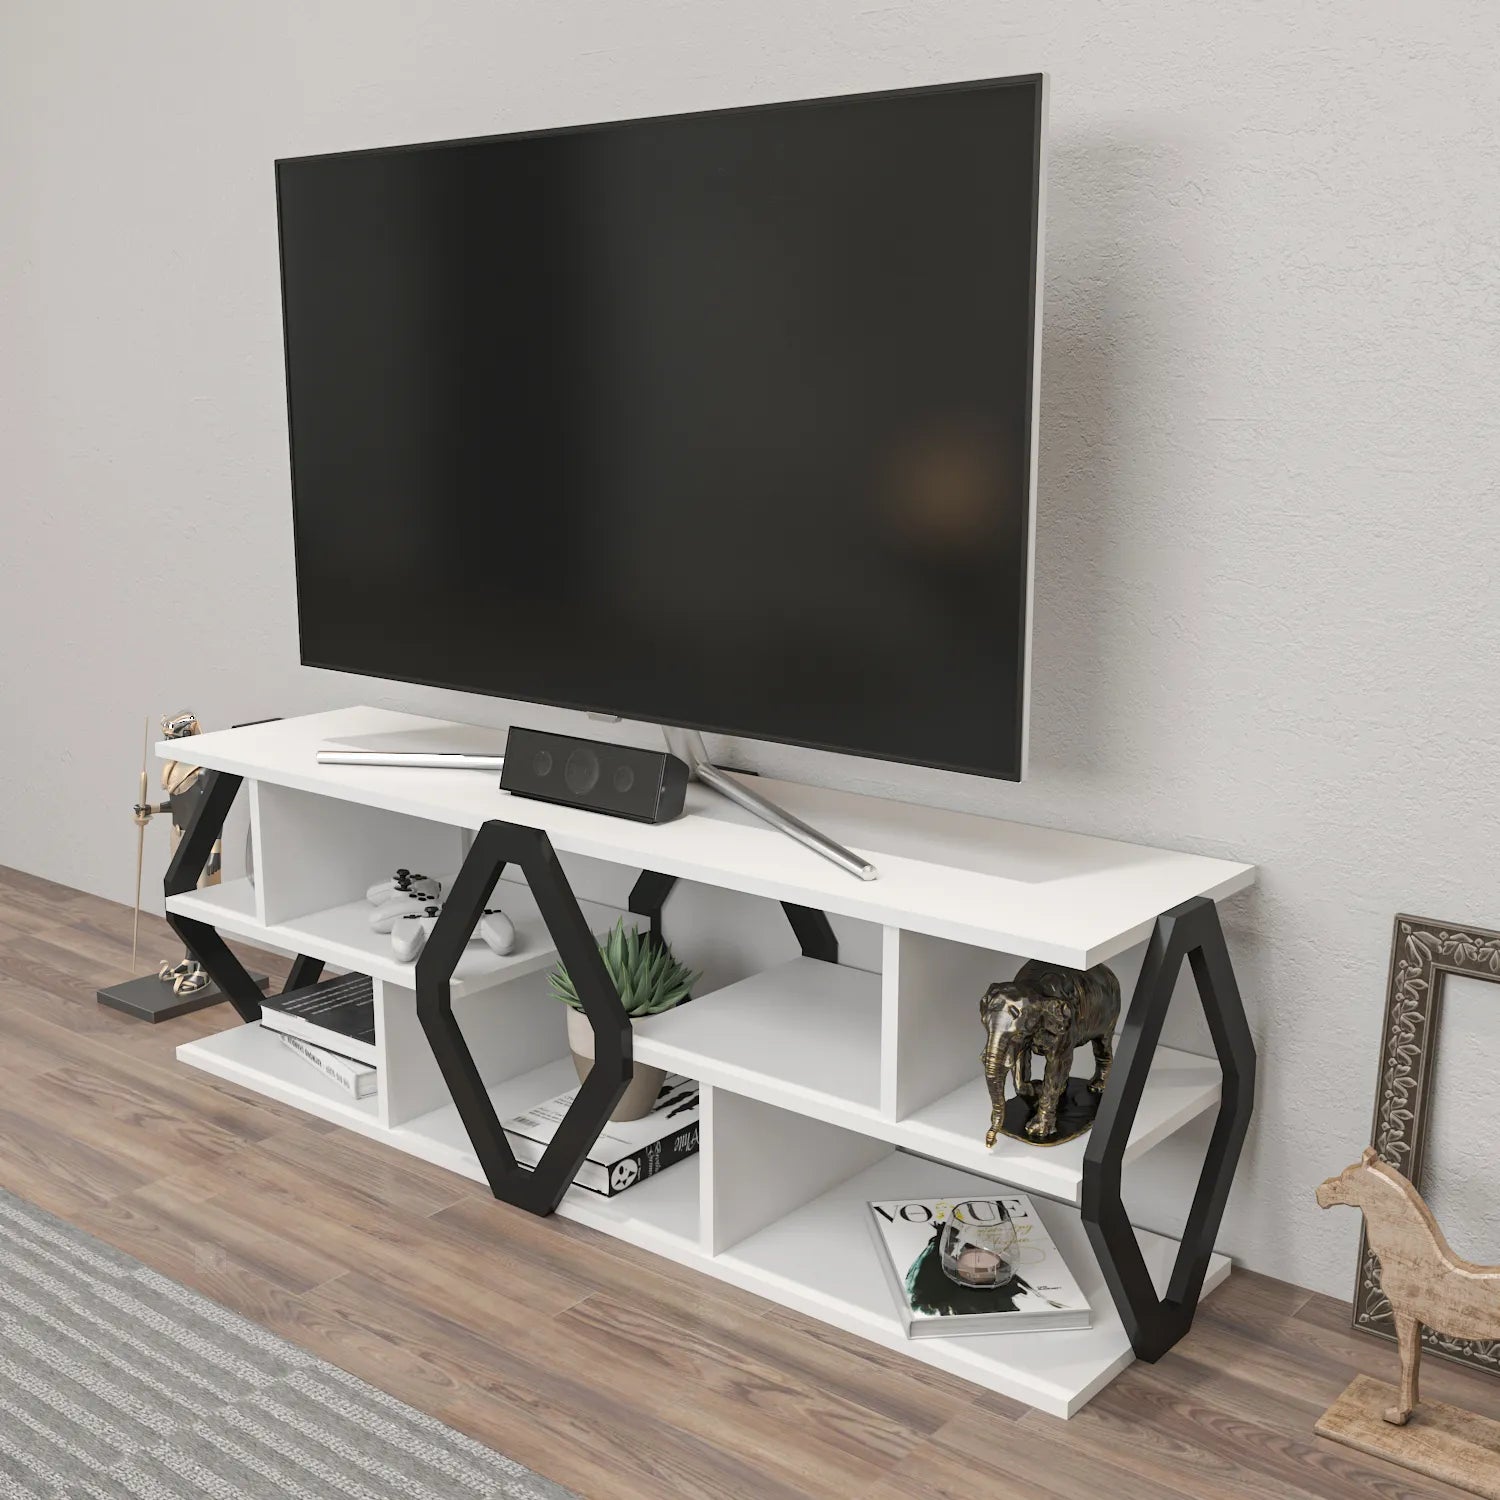 Erisa 55 inch Wide TV Stand Media Console for TVs up to 60 inch